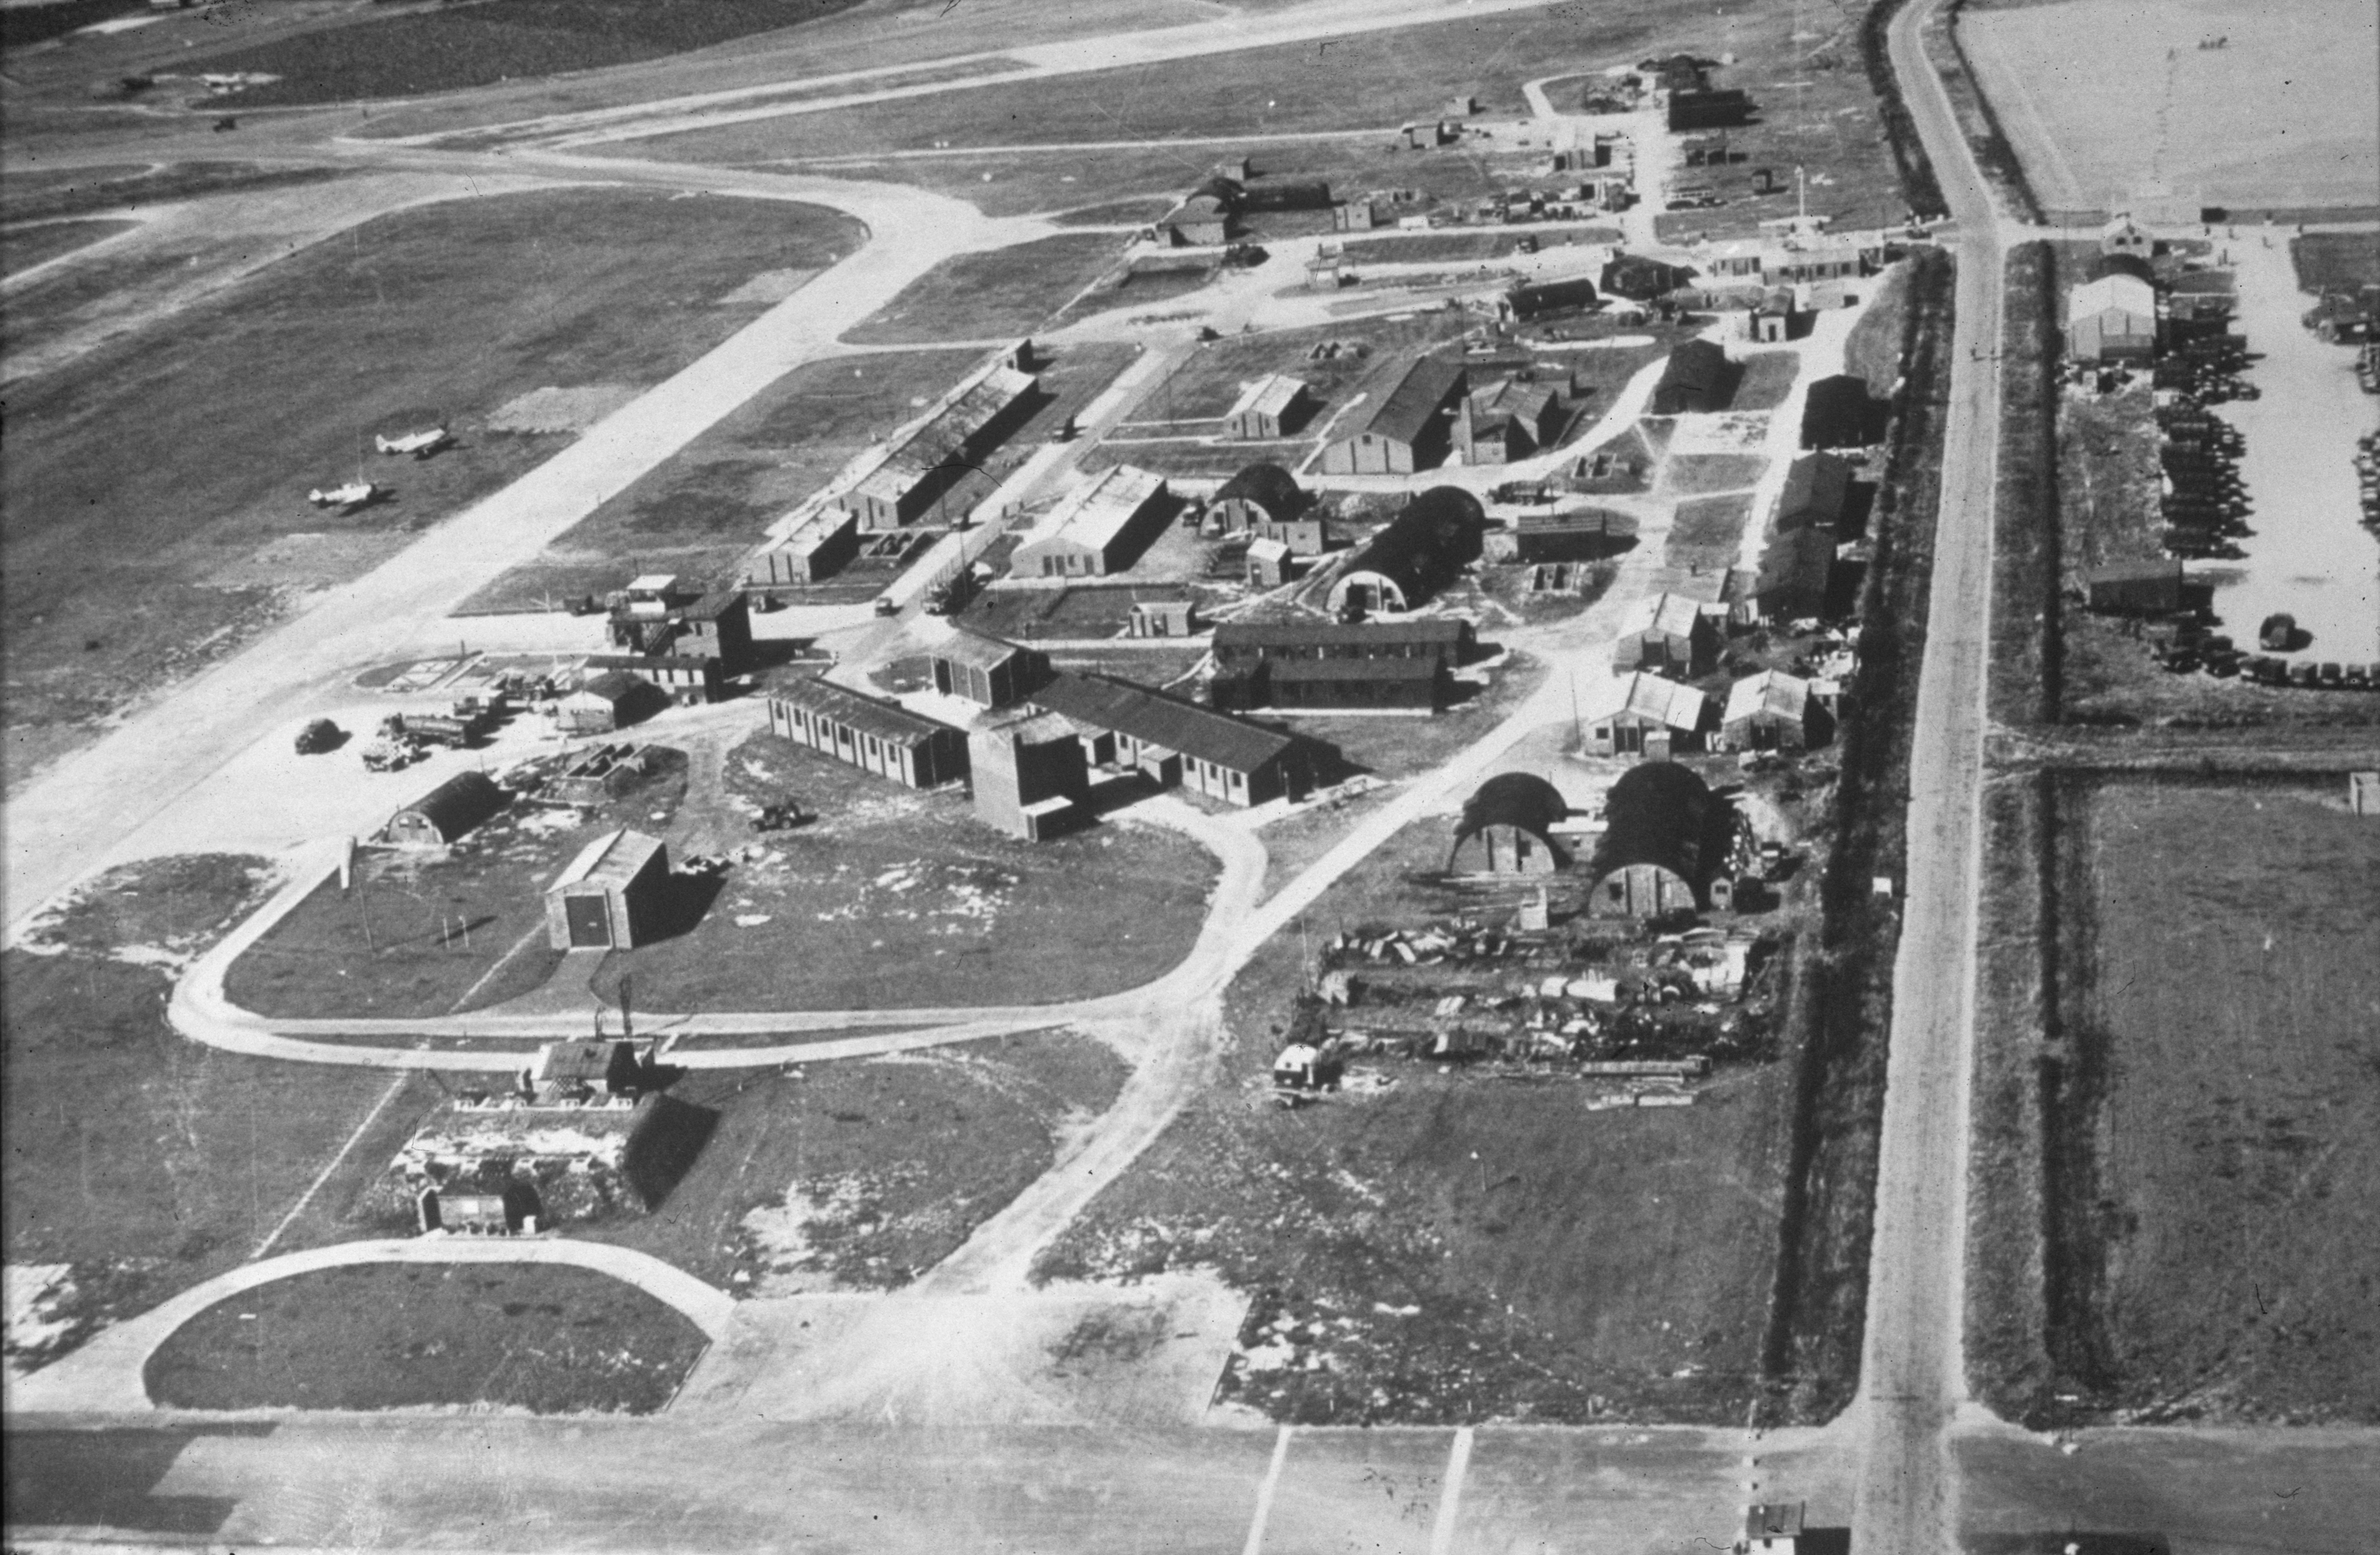 Airfield site c1944 © AAM FRE6297